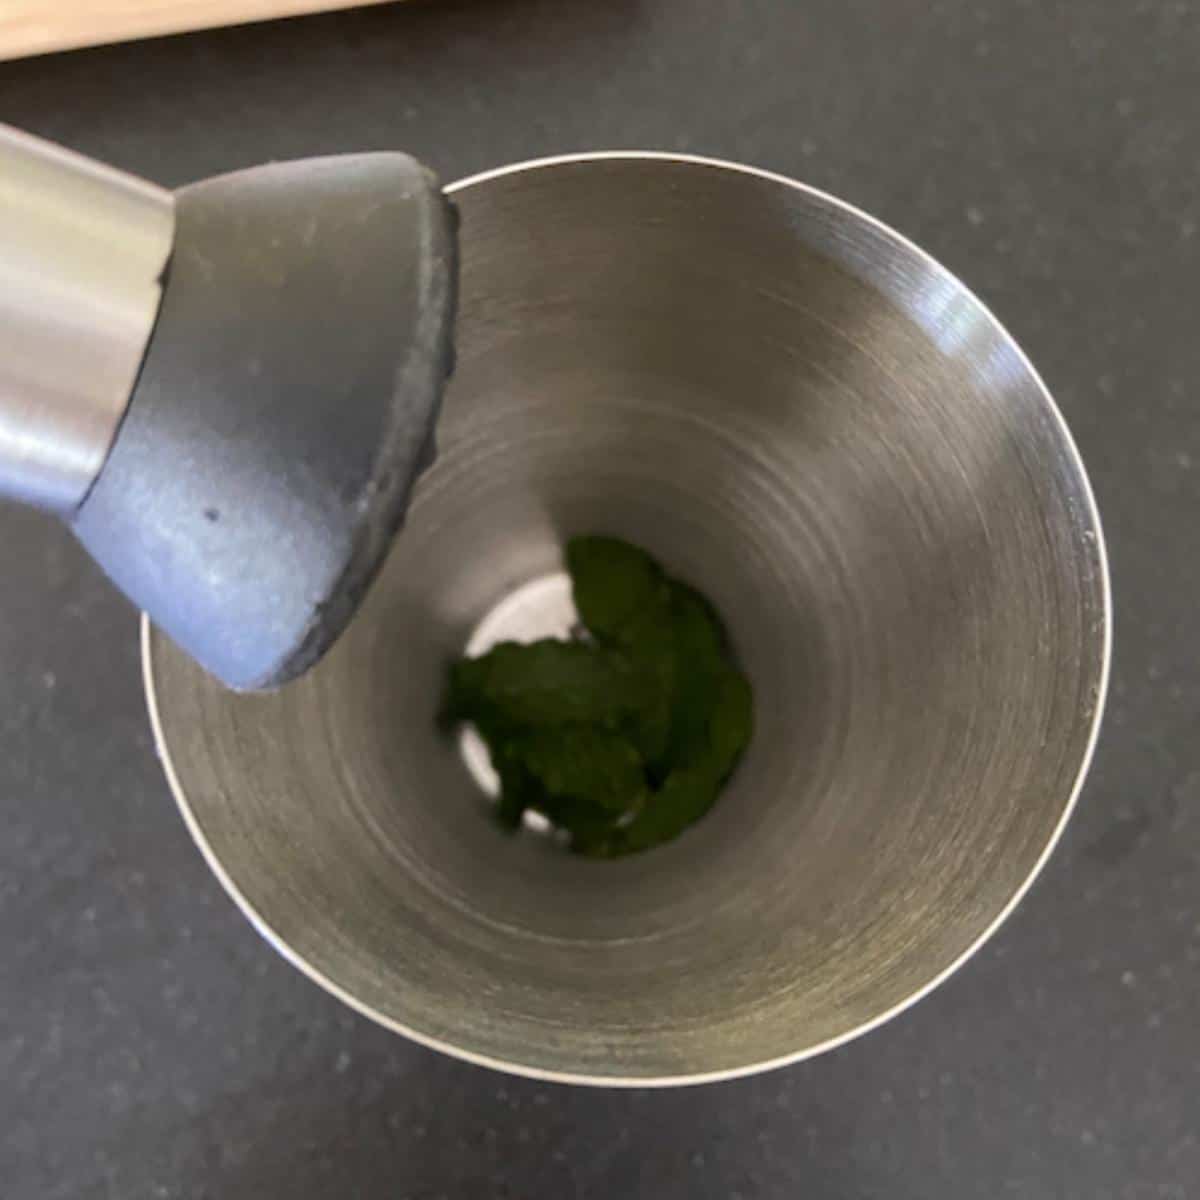 shaker with mint inside about to muddle